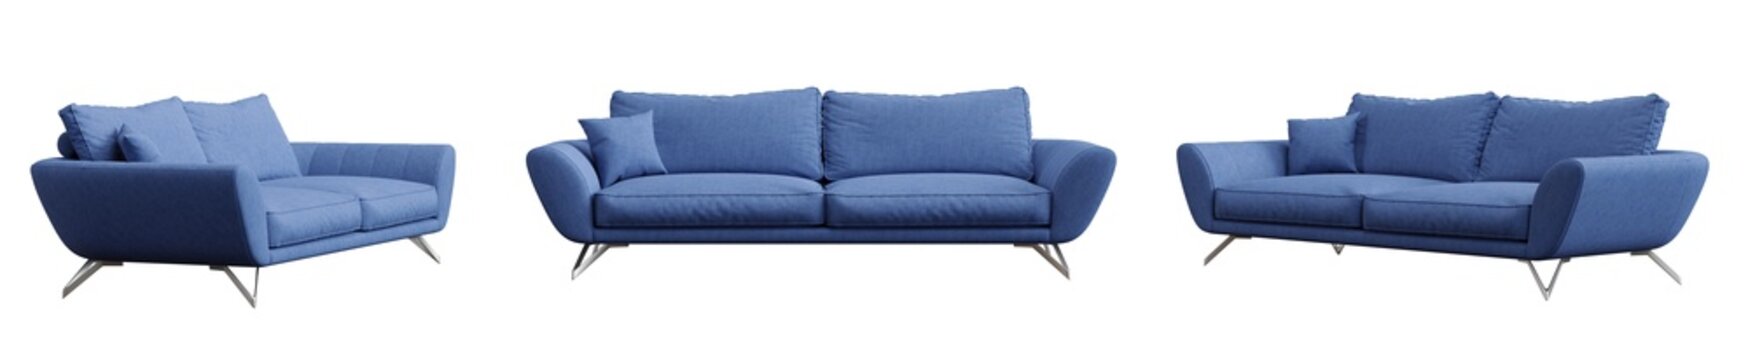 Set of blue sofa isolated on transparent background. 3D render.